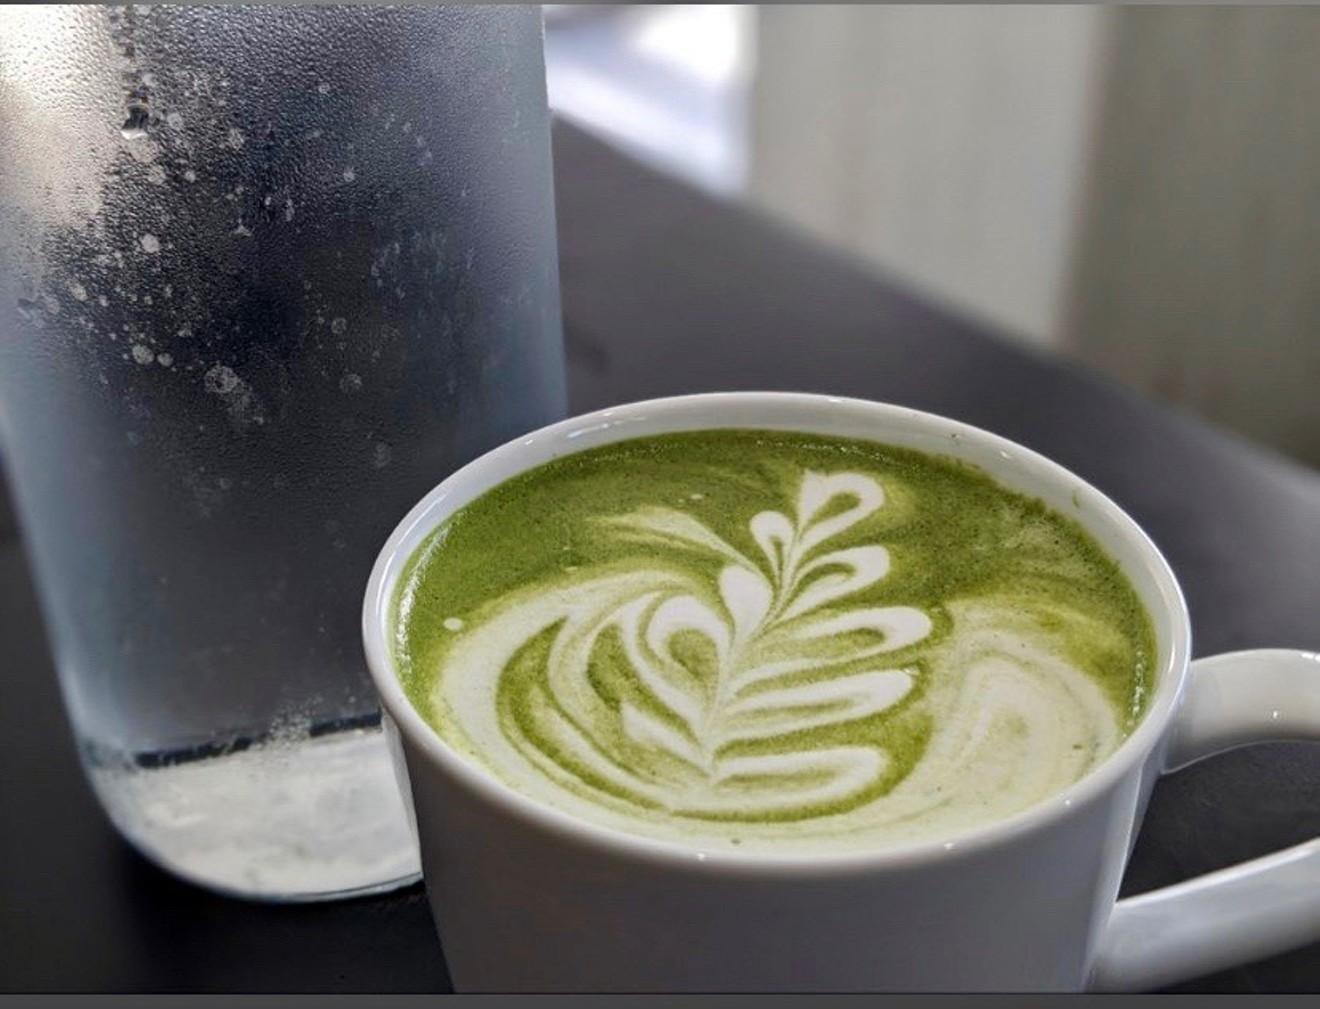 The matcha latte — one of several coffee options at JL Patisserie.